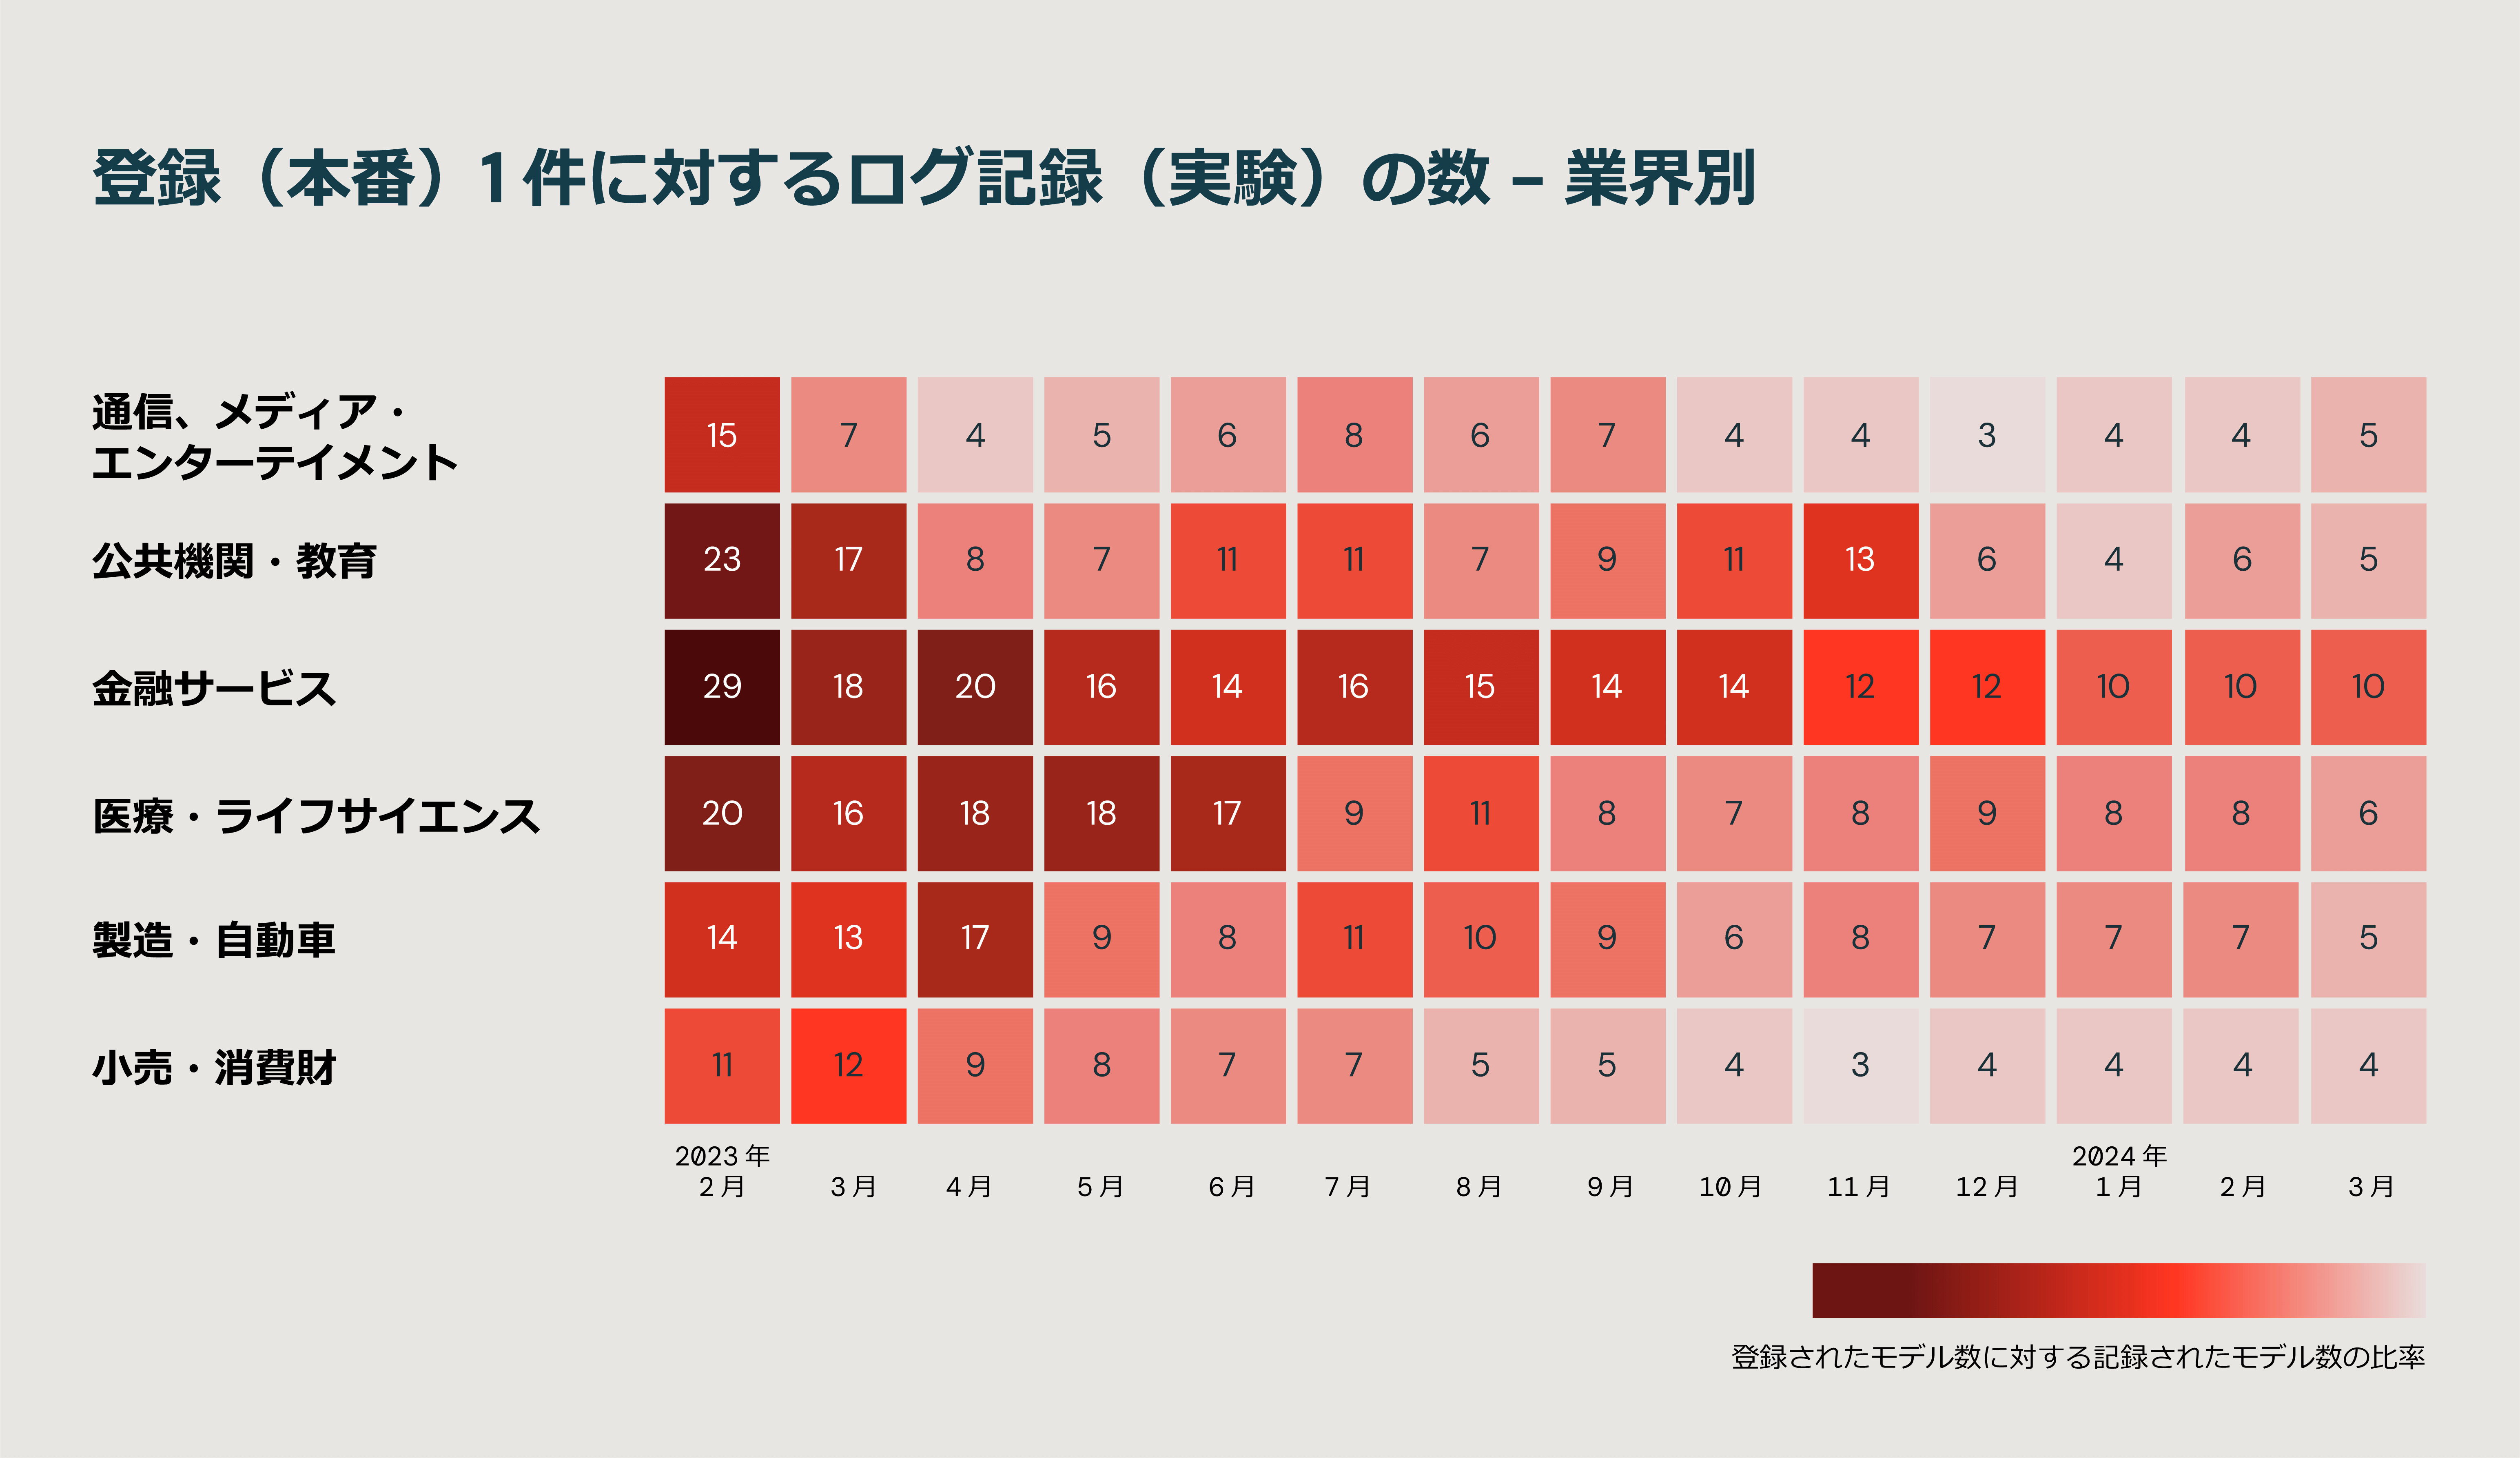 chart-02 showing the state of data and AI in 2024 in JP